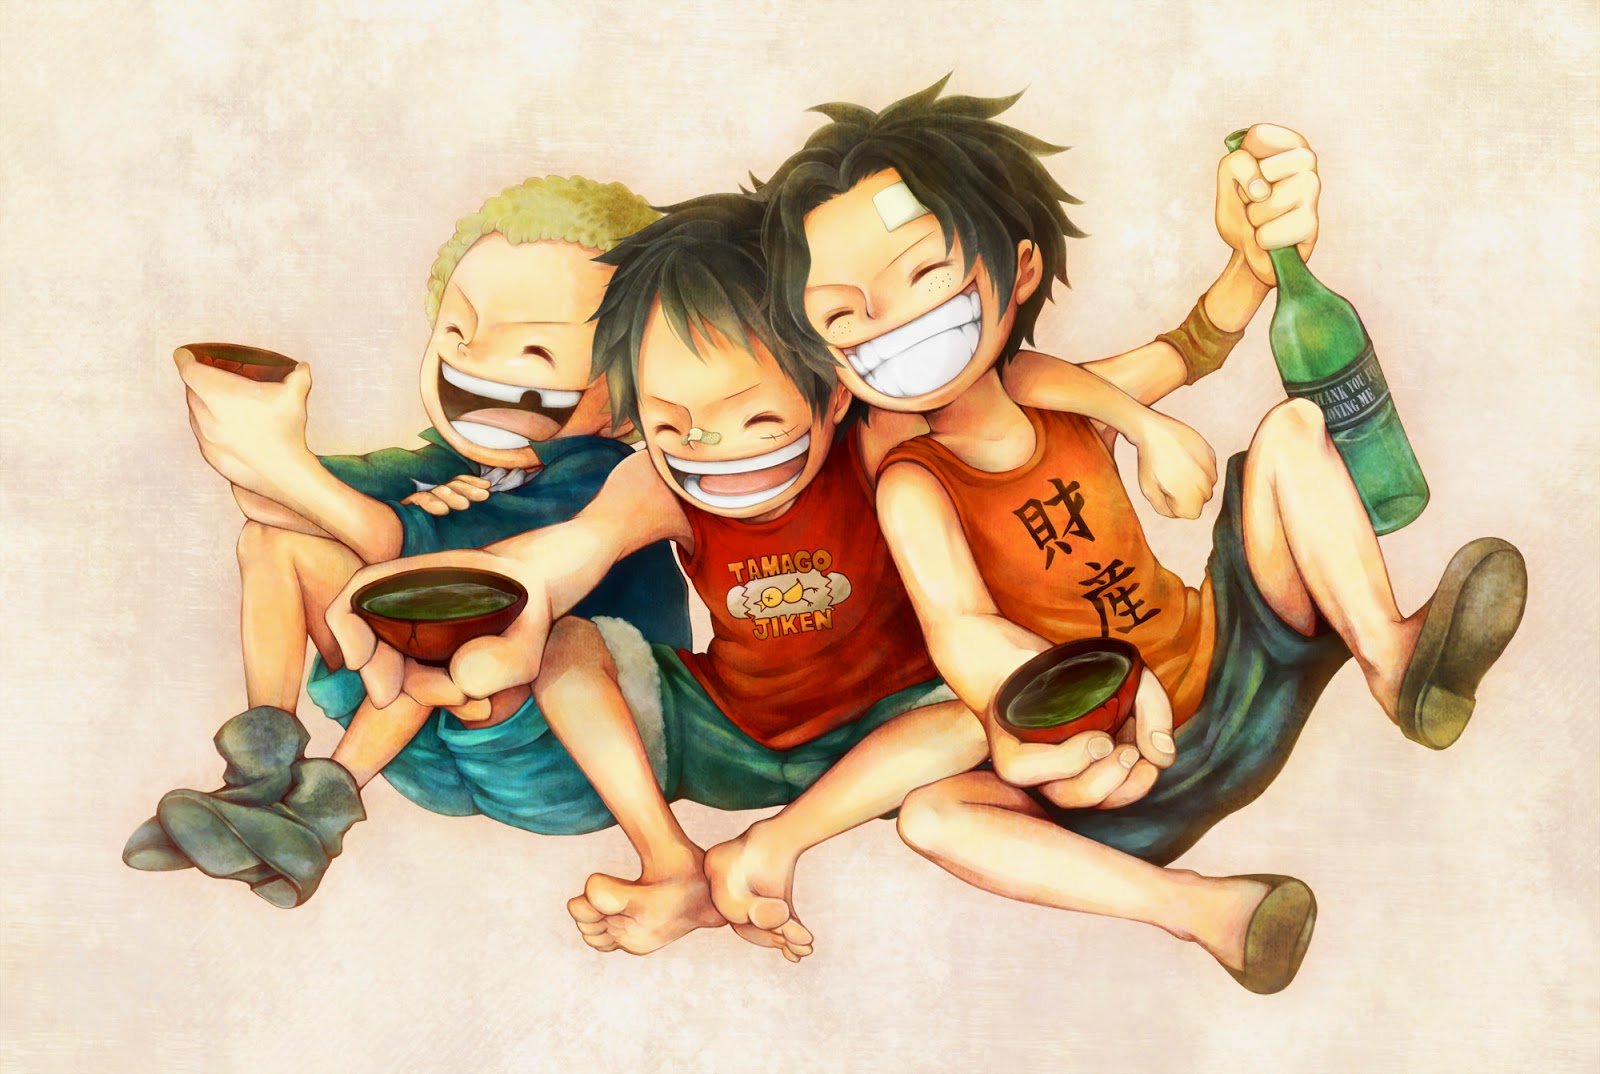 4932x3500  4932x3500 Portgas D Ace Monkey D Luffy Sabo One Piece  wallpaper  Coolwallpapersme